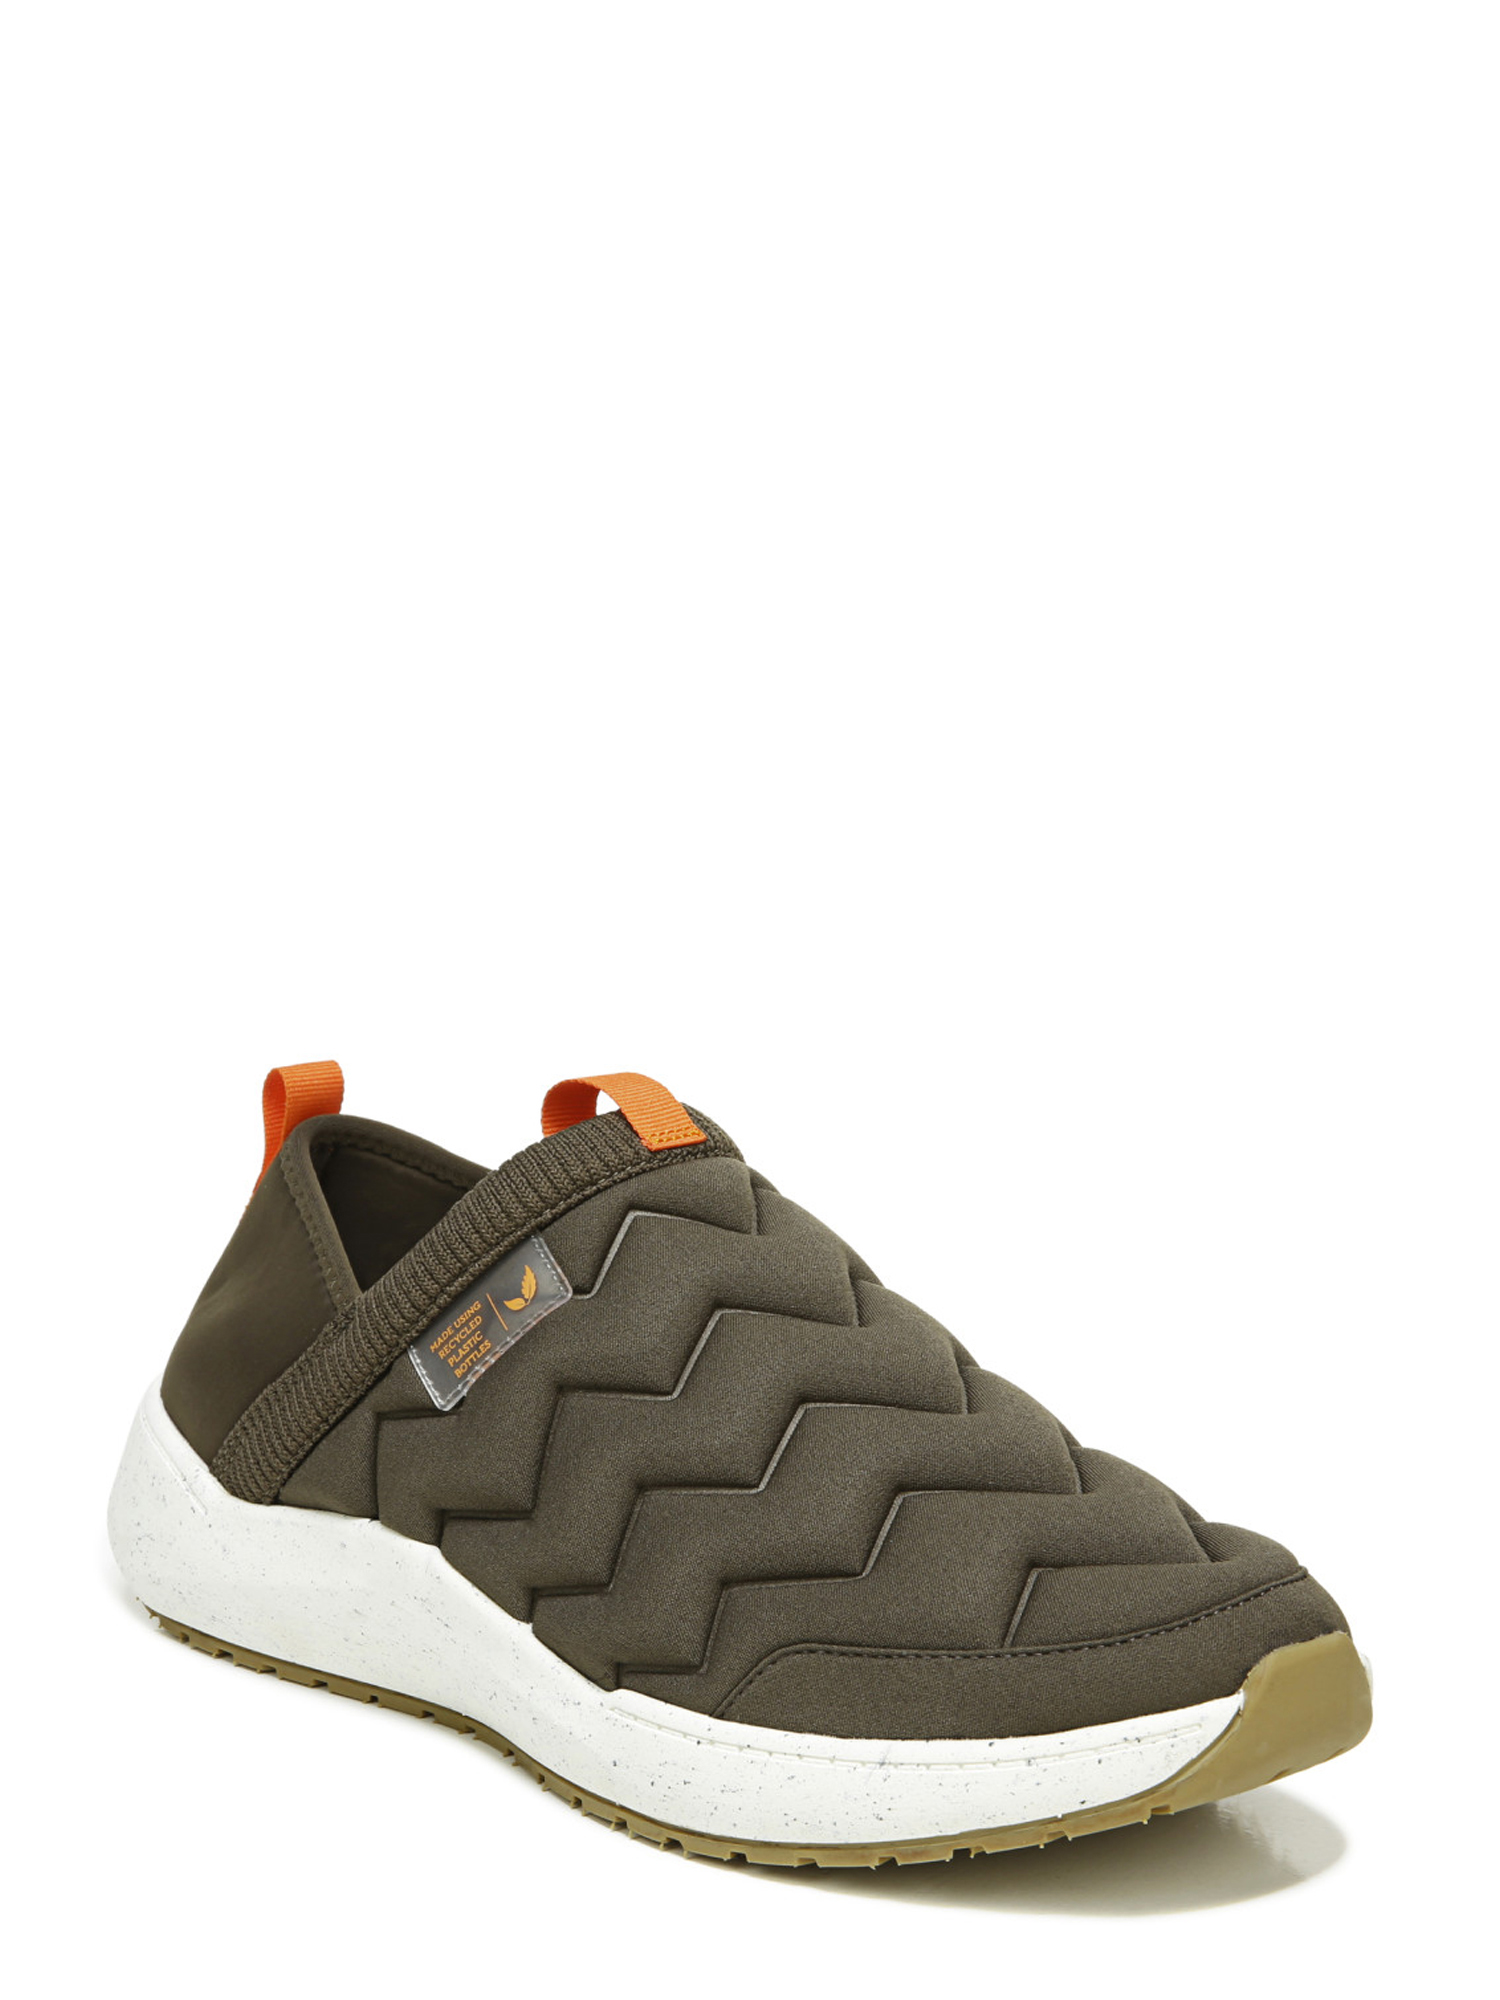 Dr. Scholl's Men's Home and Out Slip on Sneaker - image 1 of 6